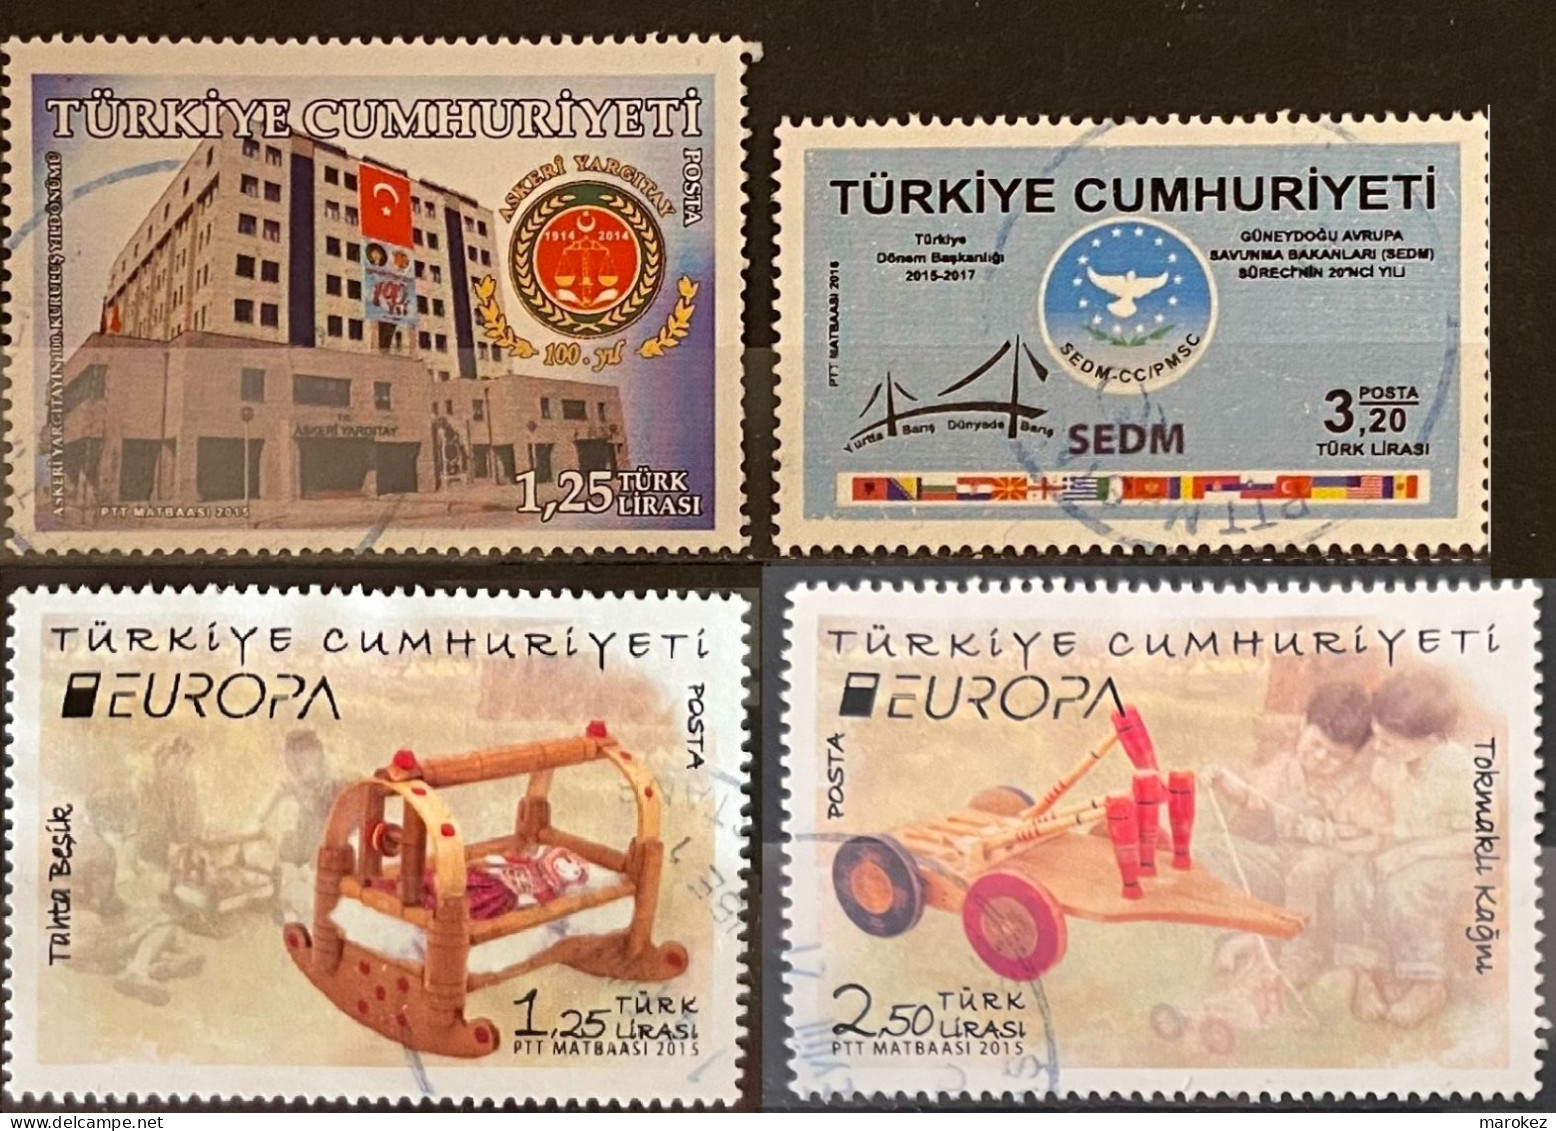 TURKEY 2015-2016 Institutions, Europa & Associations 4 Postally Used Stamps MICHEL # 4166,4176,4177,4307 - Oblitérés